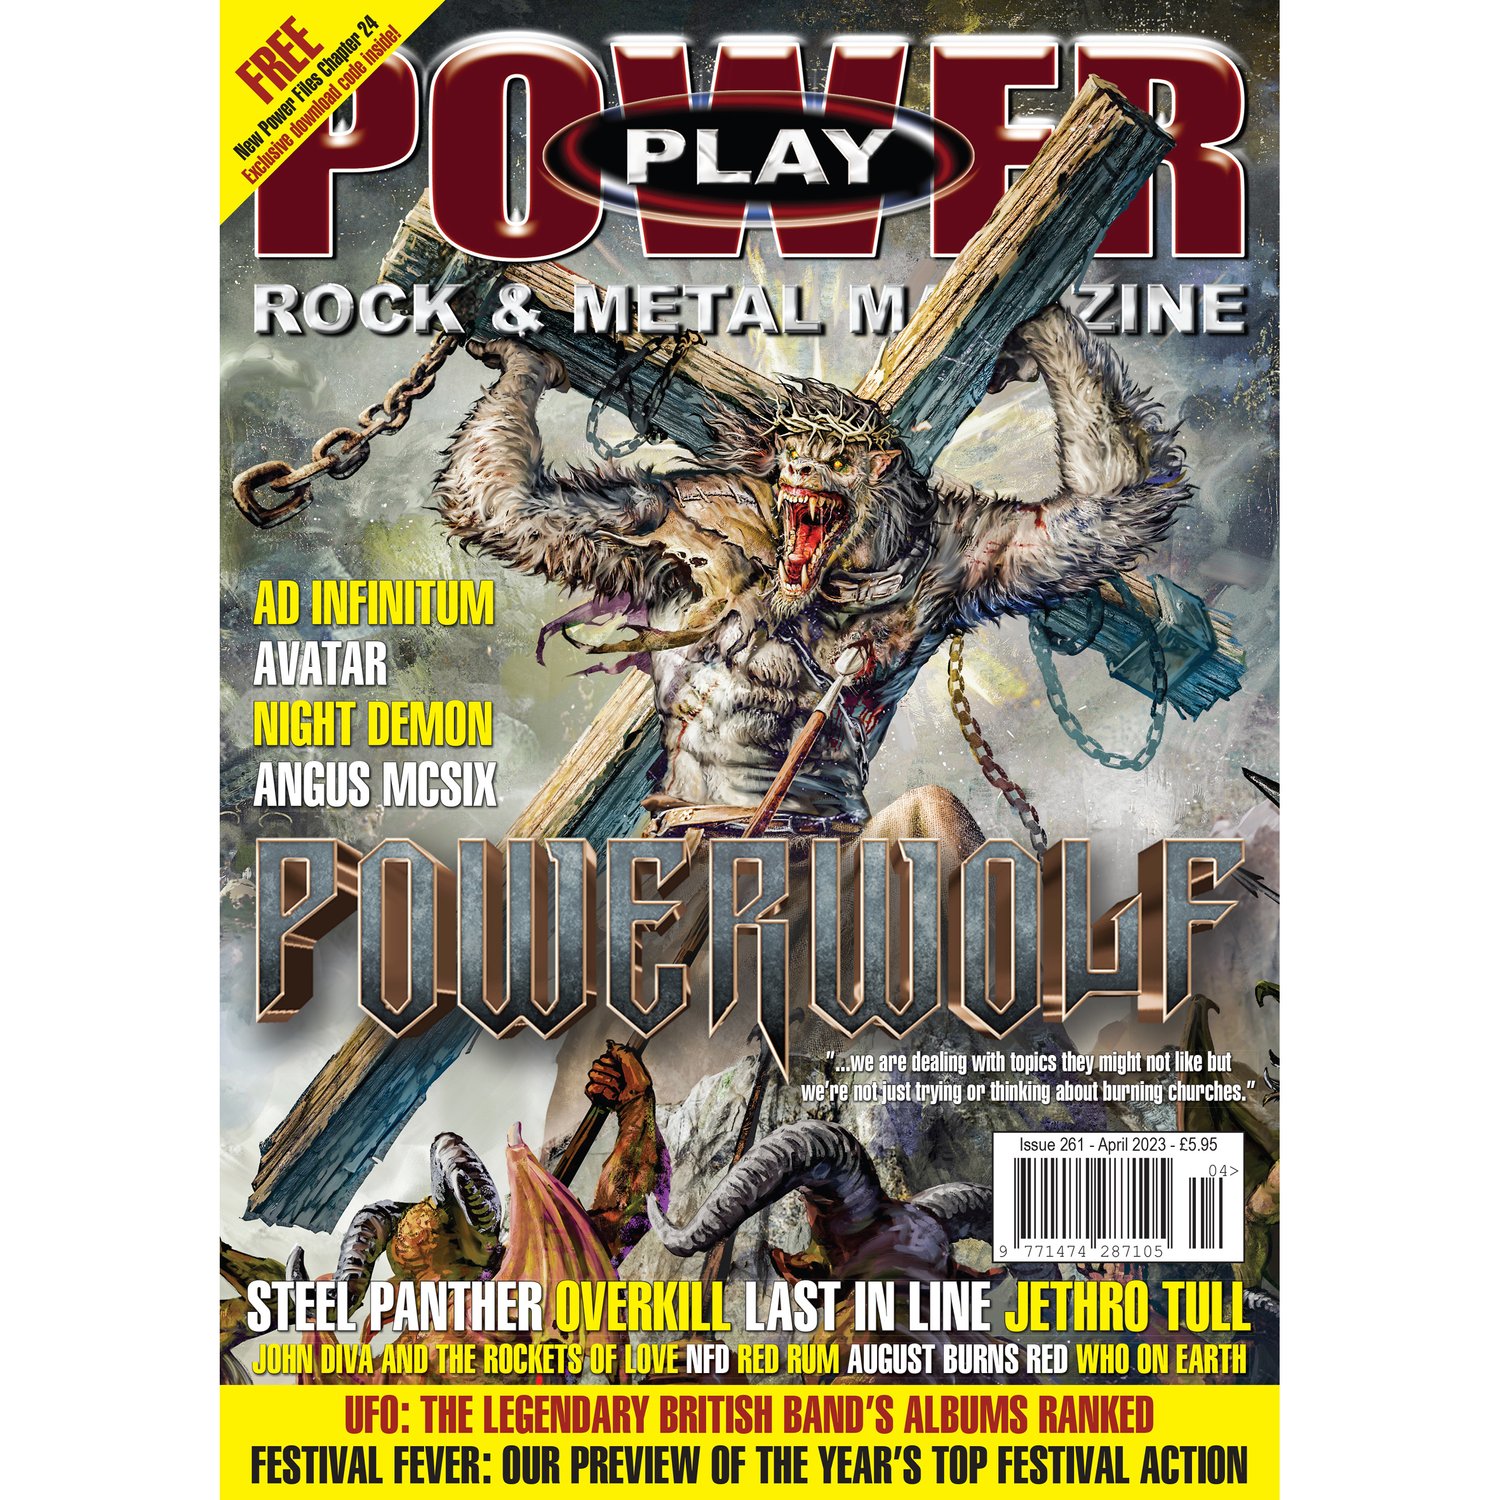 POWERWOLF to Release New Album, Interludium, on Good Friday, April 7, 2023  - All About The Rock